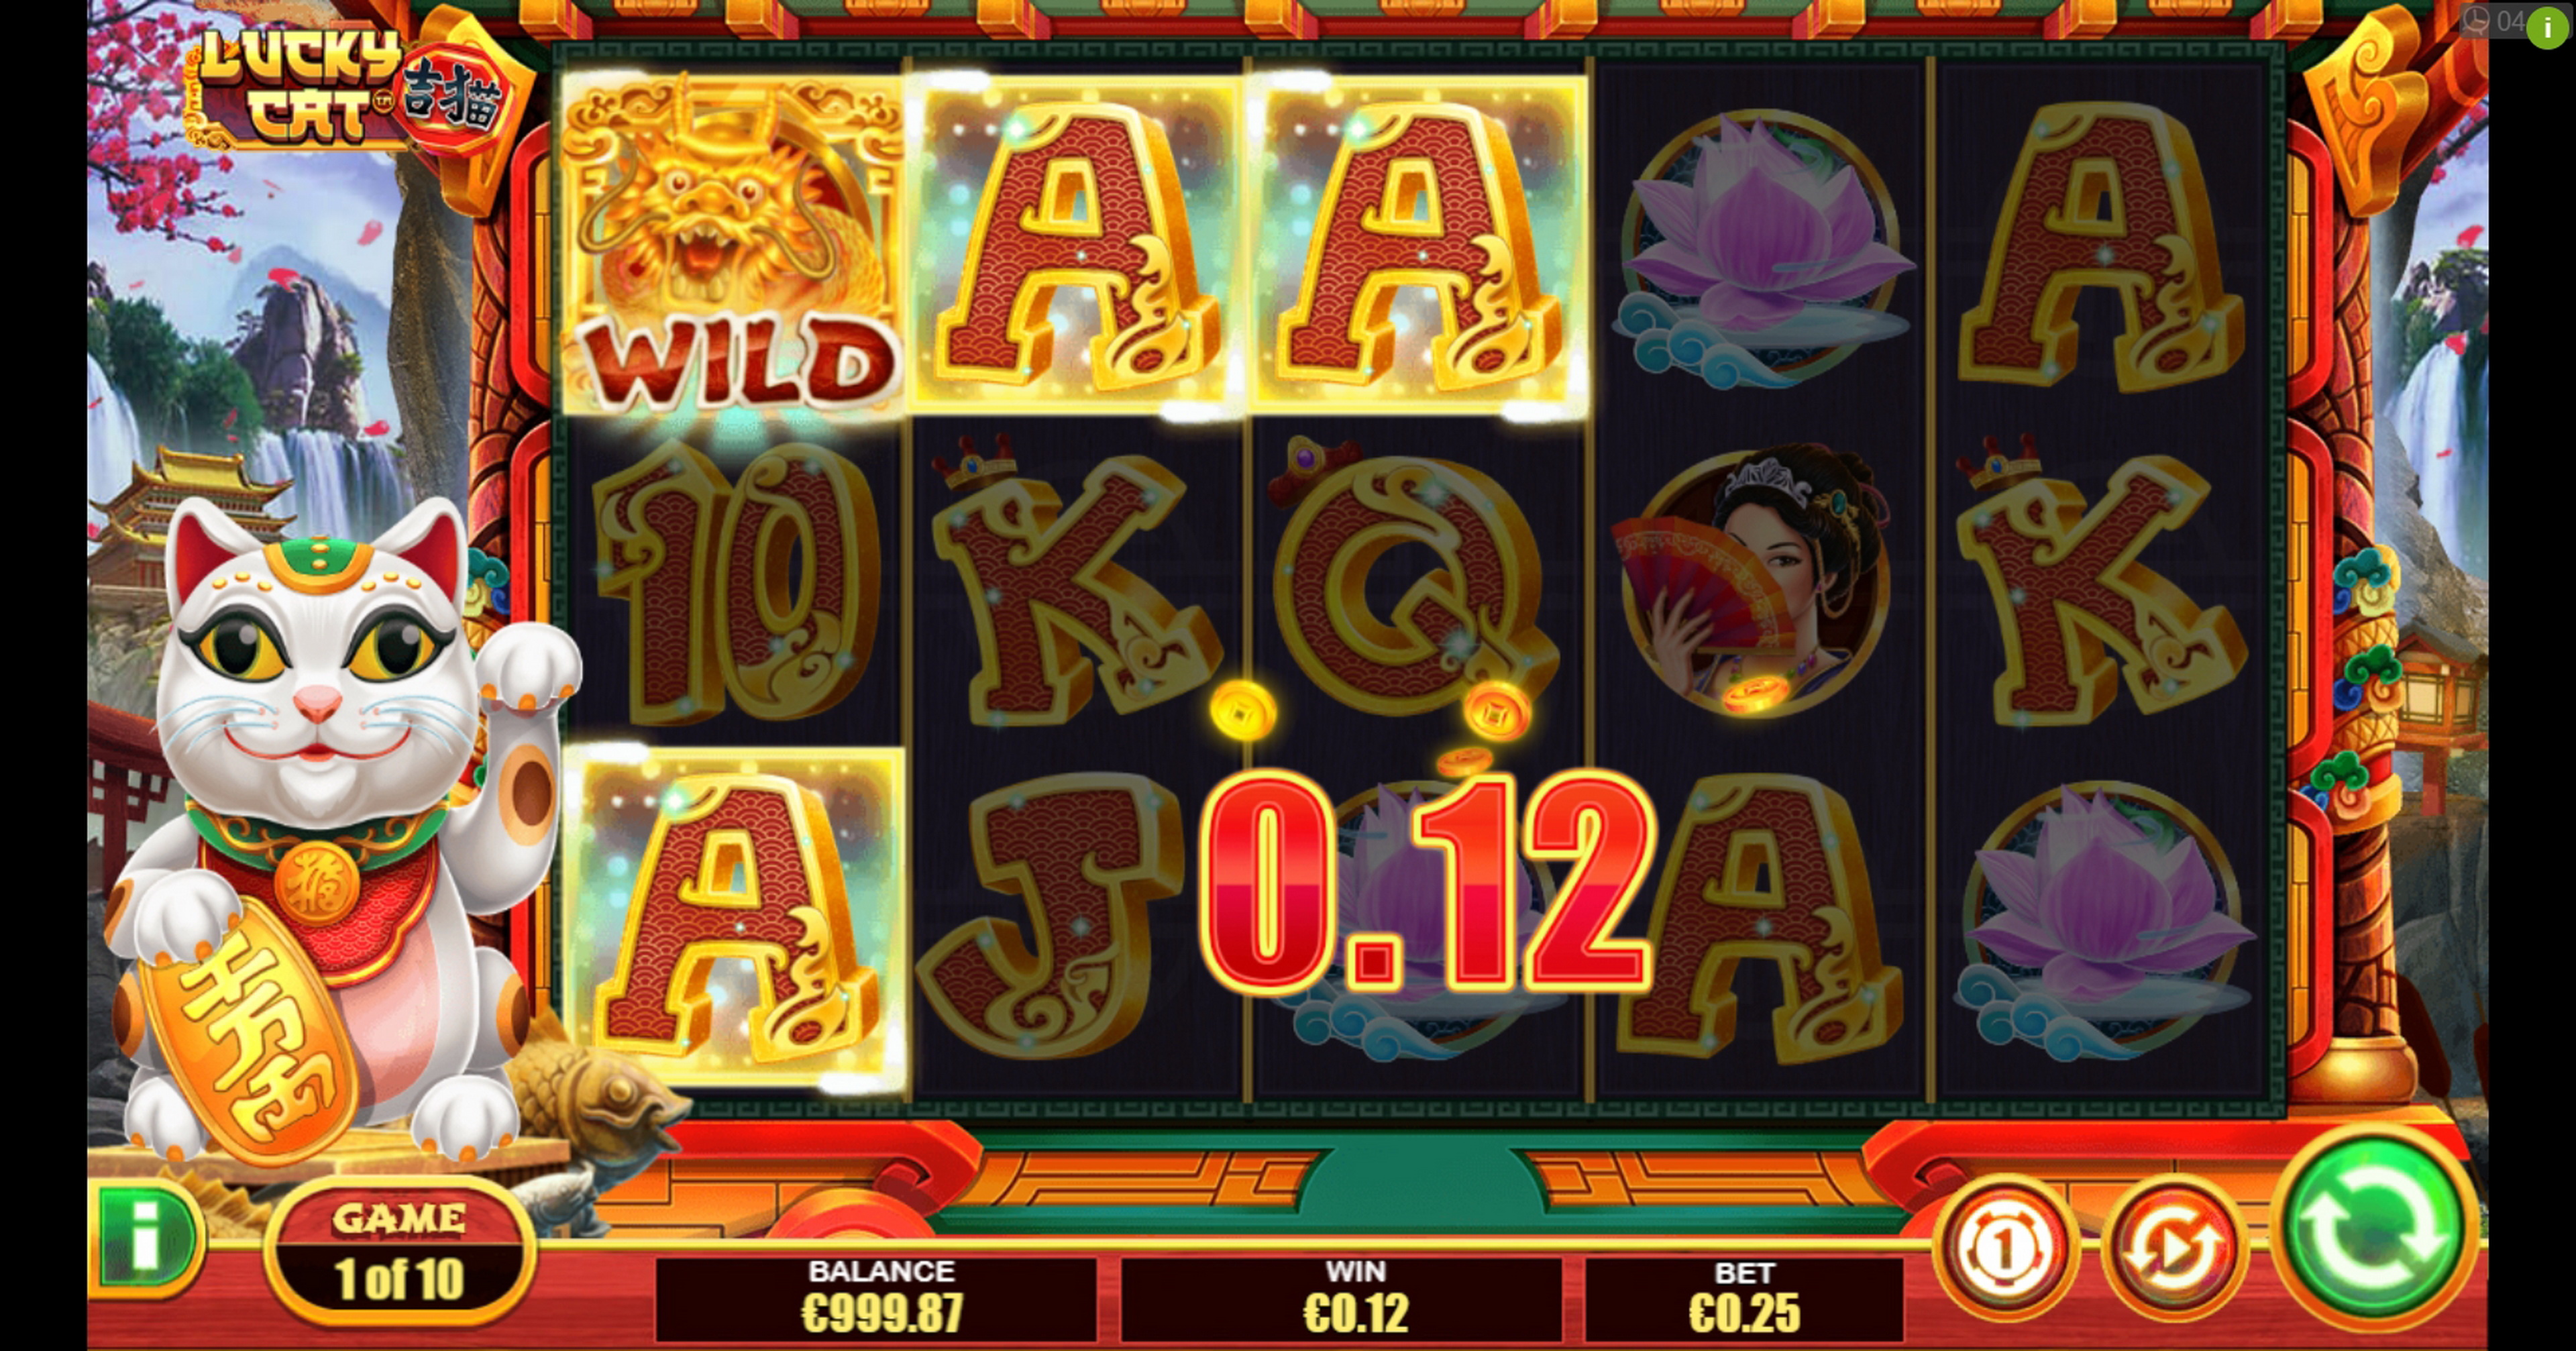 Win Money in Lucky Cat Free Slot Game by Pirates Gold Studios